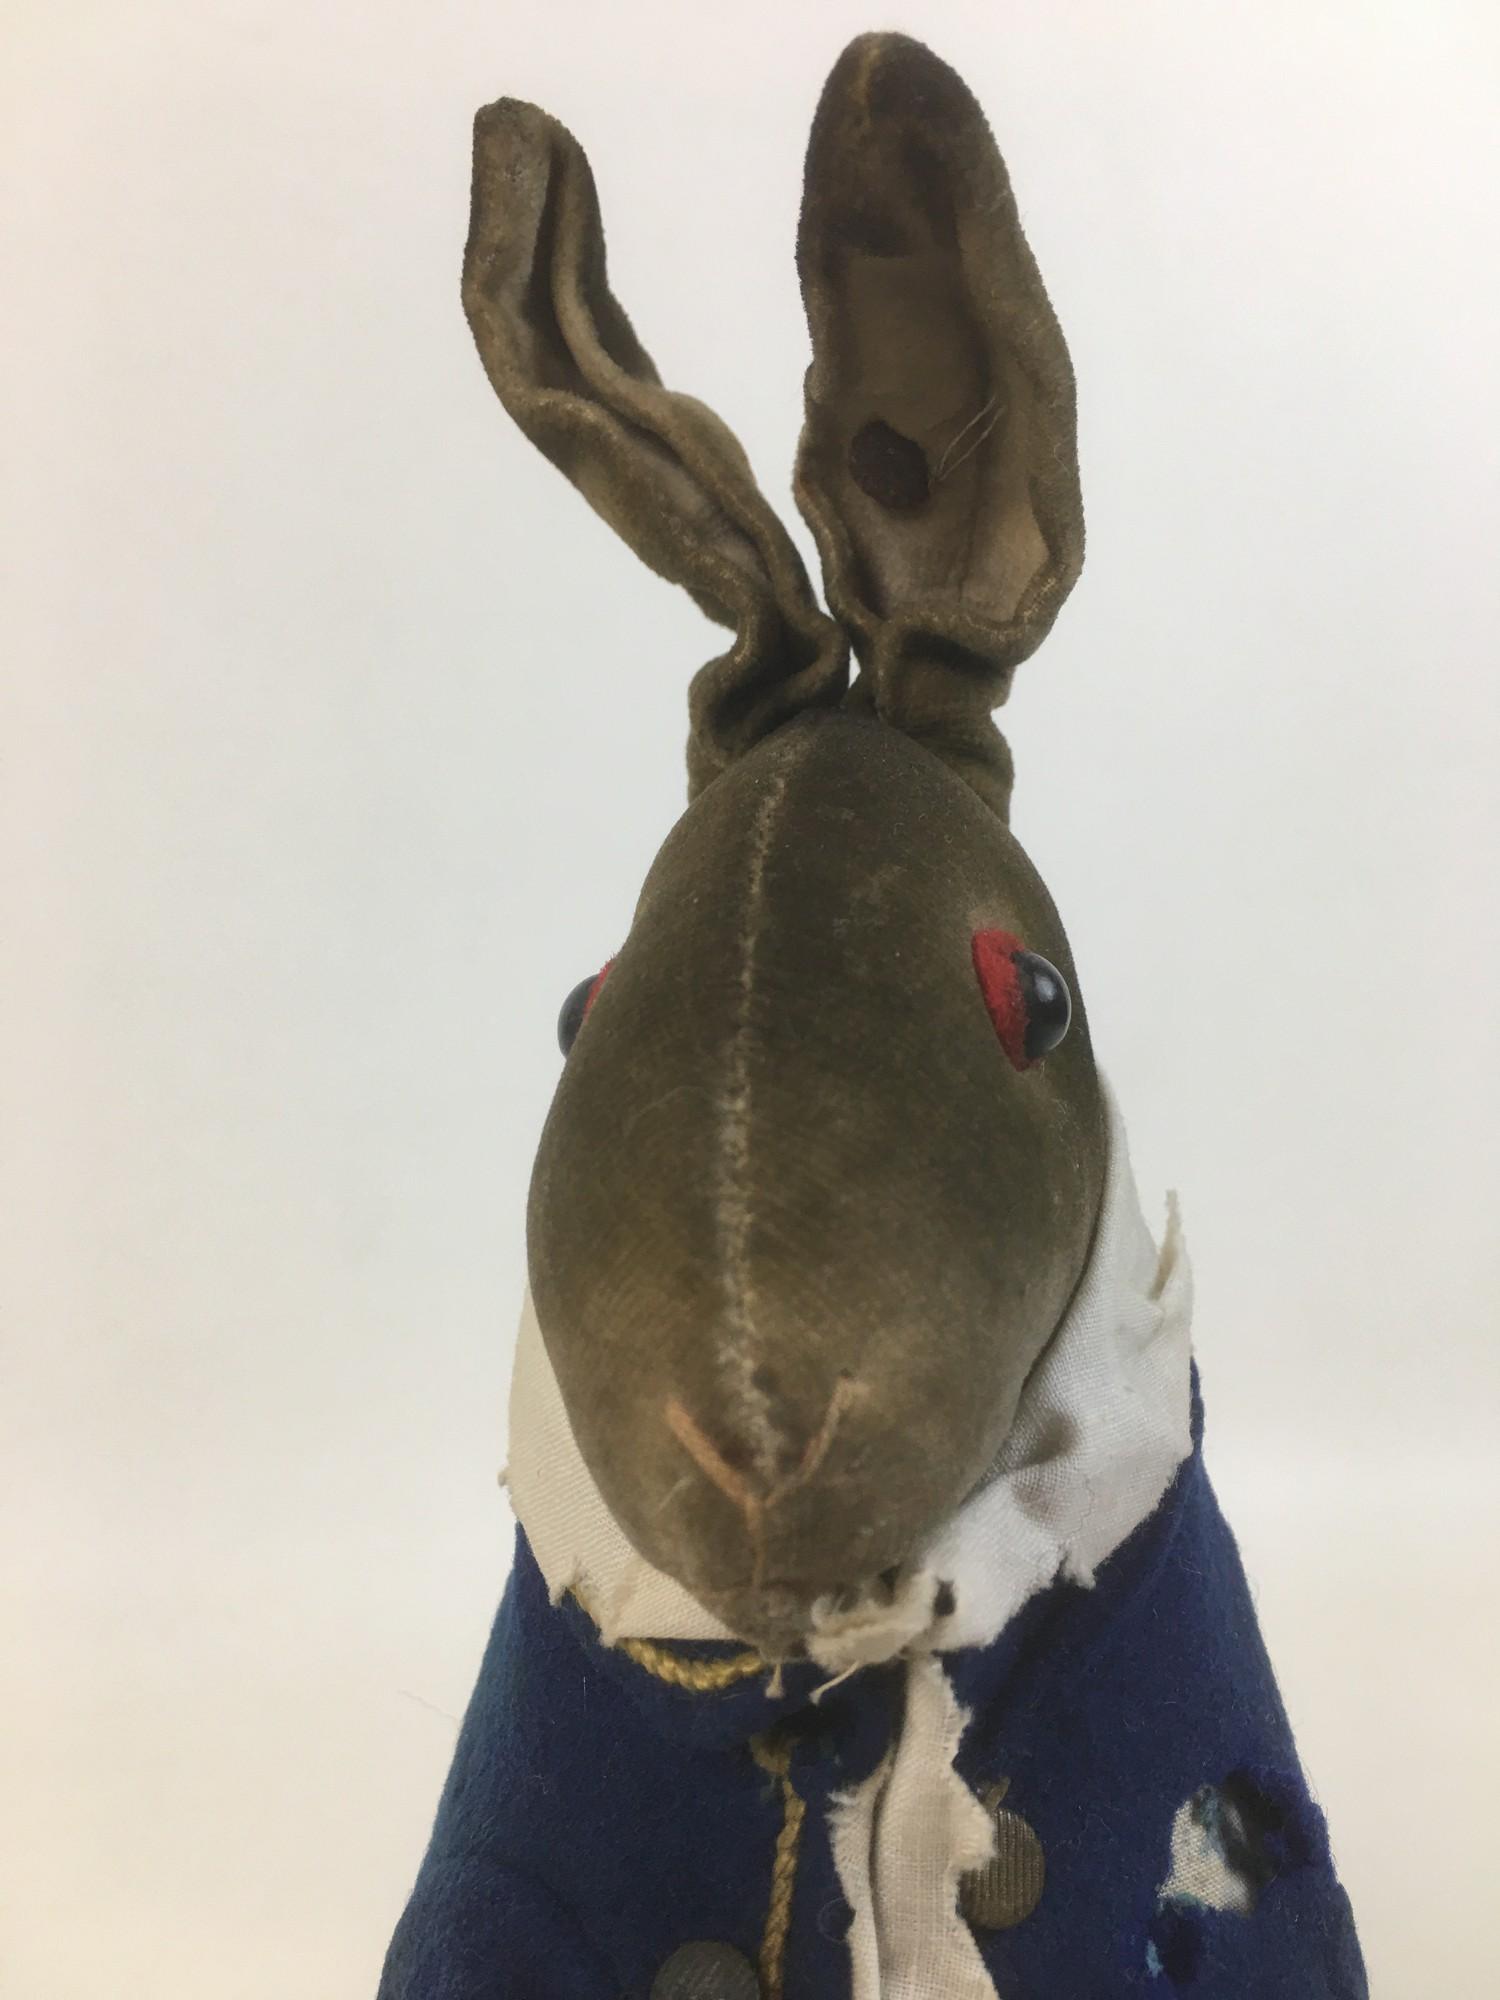 An early 20th century Steiff soft toy of Beatrix Potter's Peter Rabbit, with a white shirt - Image 10 of 11